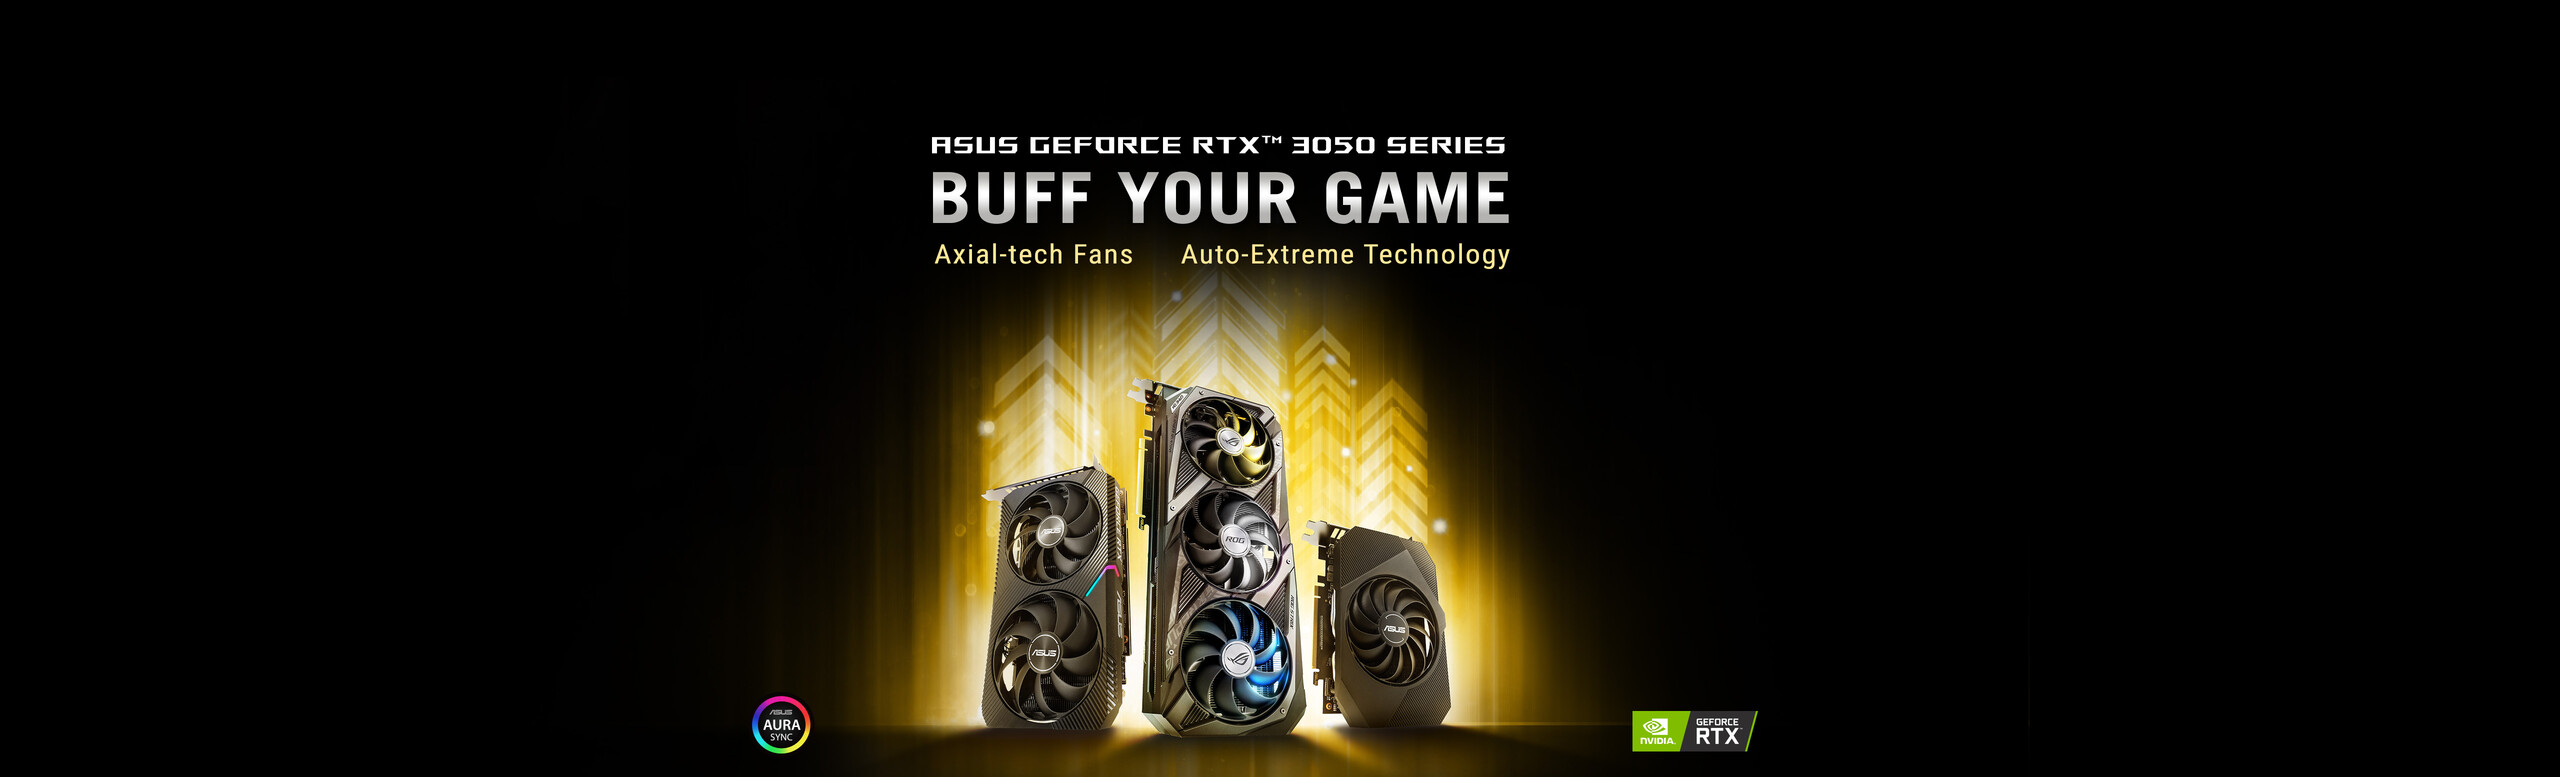 buff your game-RTX3050